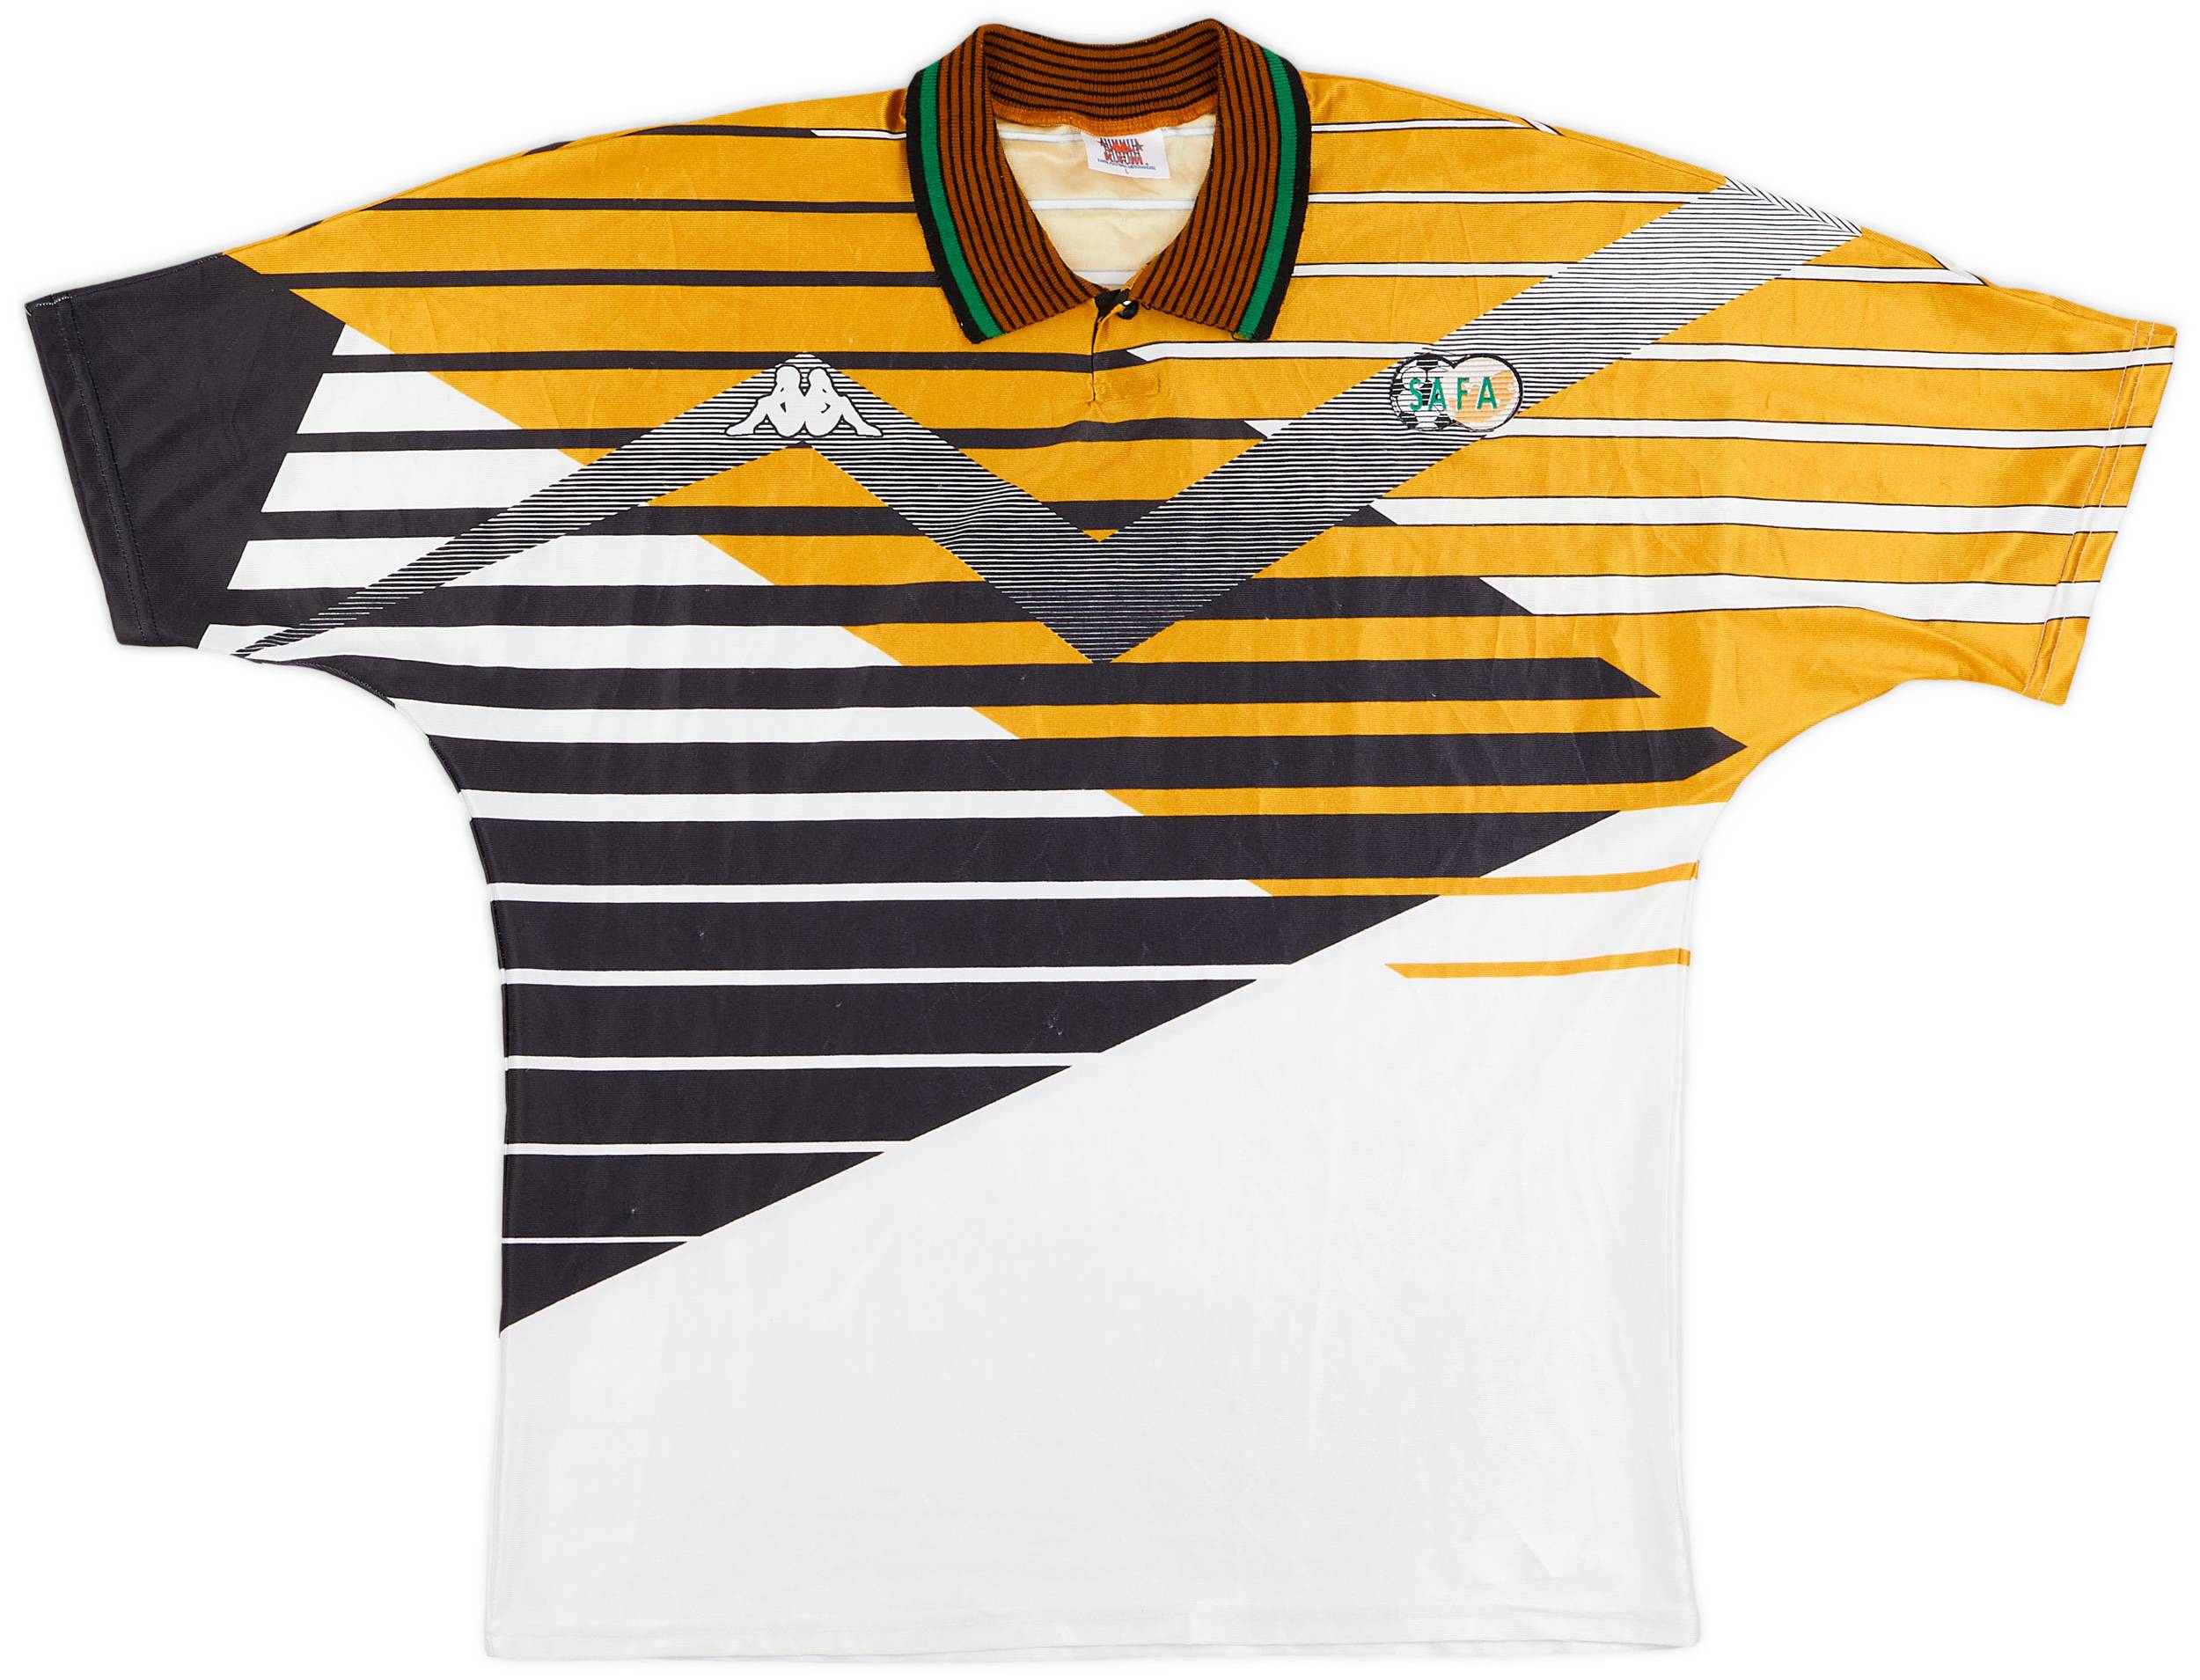 1996-98 South Africa Home Shirt - 9/10 - (L)